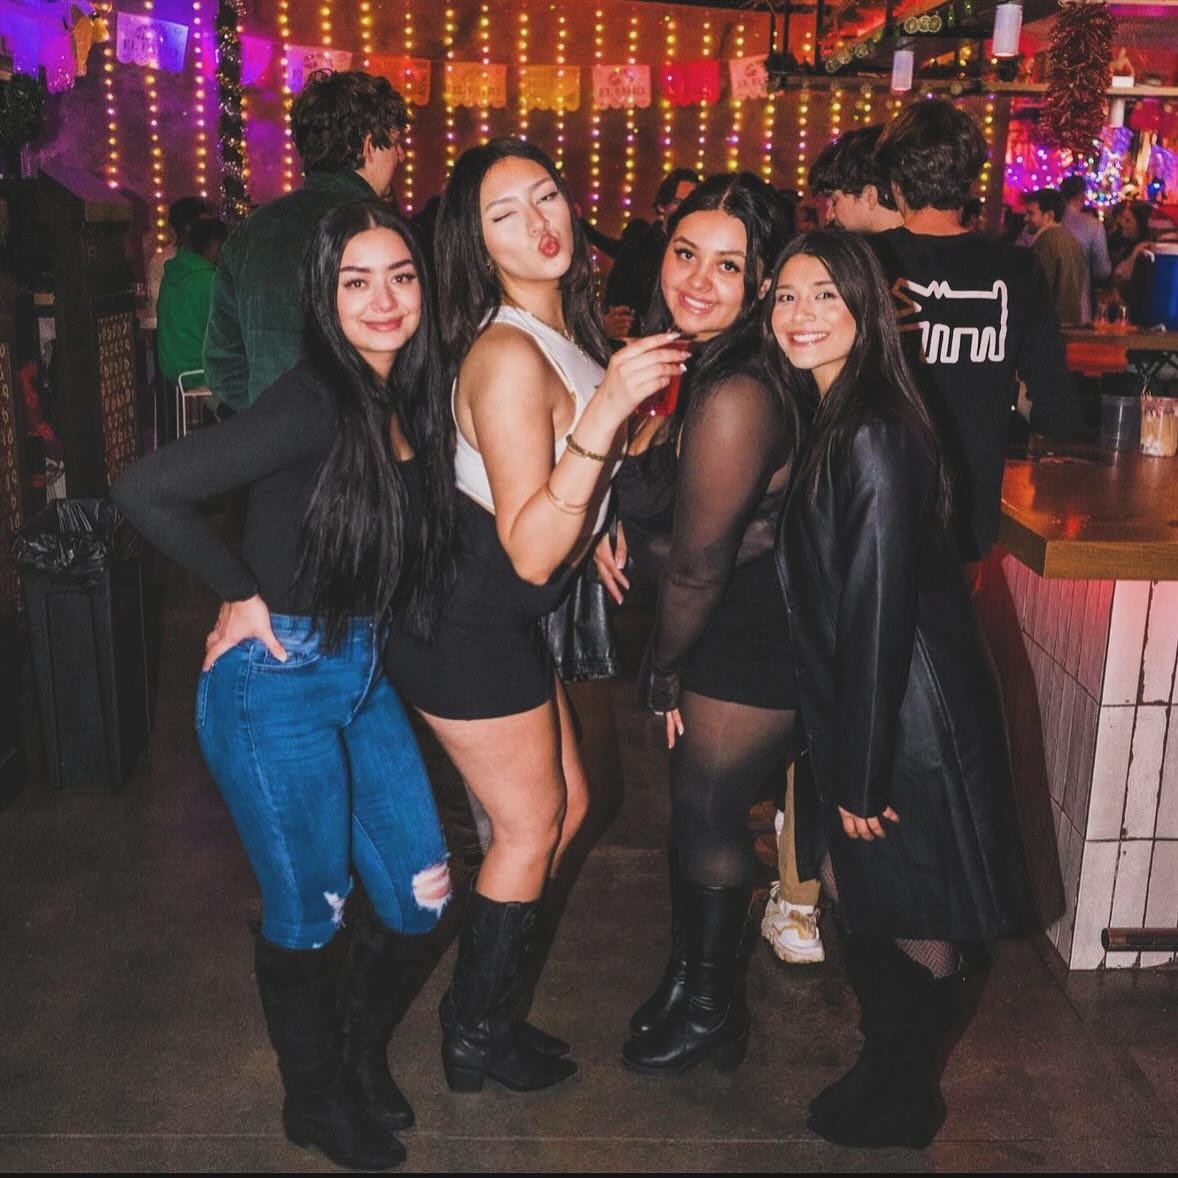 Besos, babes! 💋 It&rsquo;s Friday, and you know what that means?! Tacos and Tequila time! Come join the fiesta &ndash; sippin&rsquo; tequila, munchin&rsquo; tacos, and living our best life. #consafosdenver #marketstreet #tacosandtequila